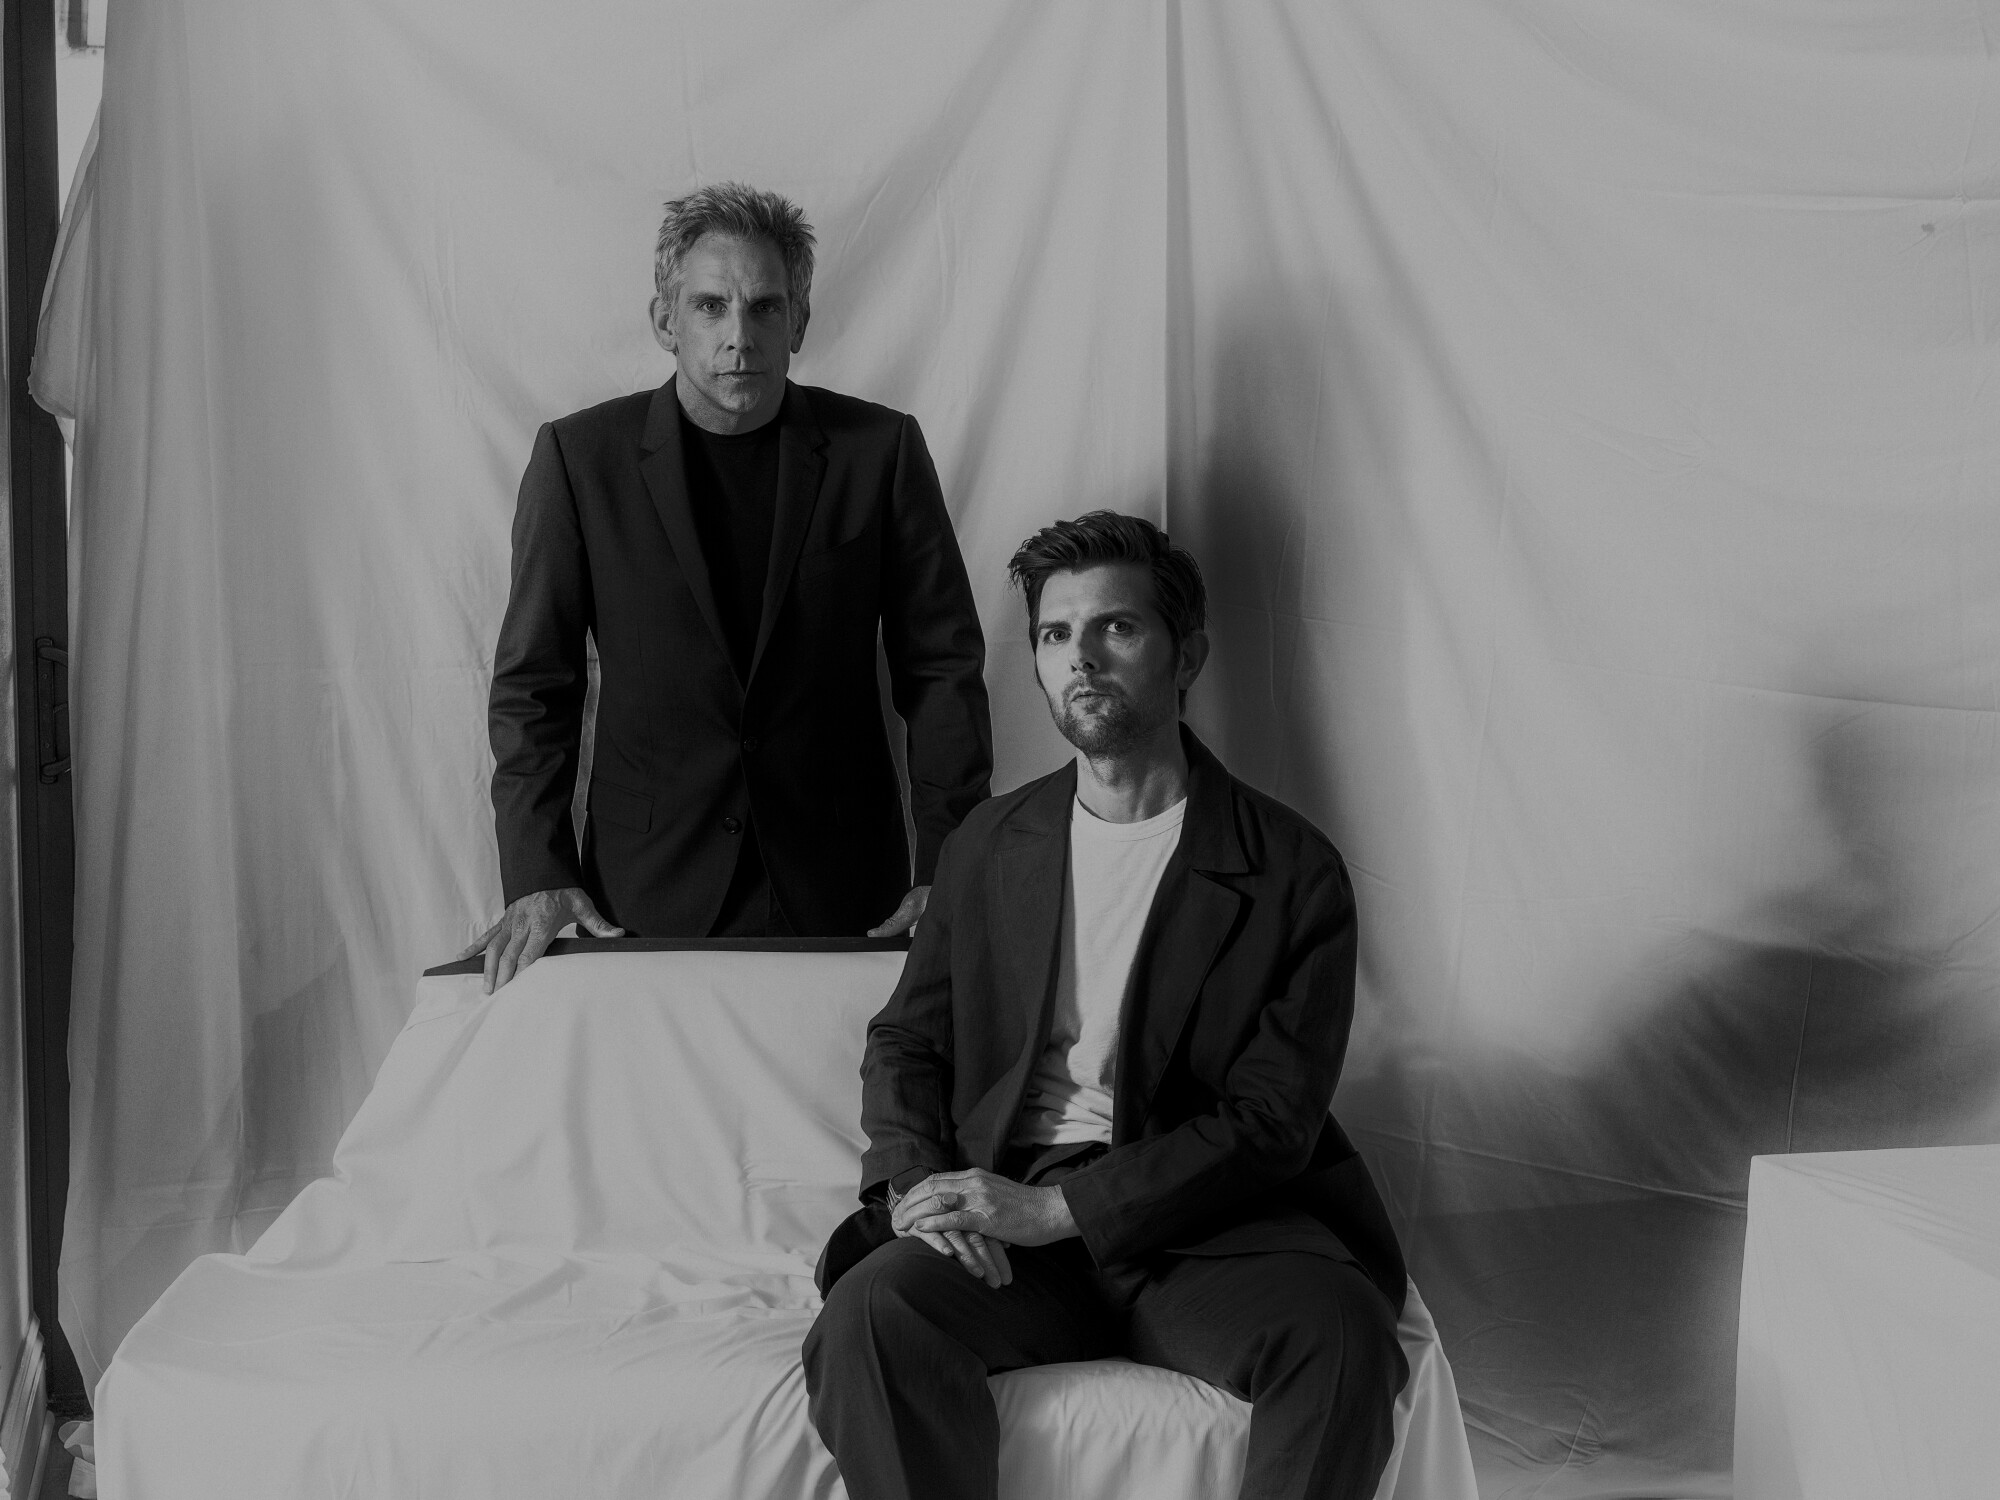 Two men pose for a portrait against a white fabric background